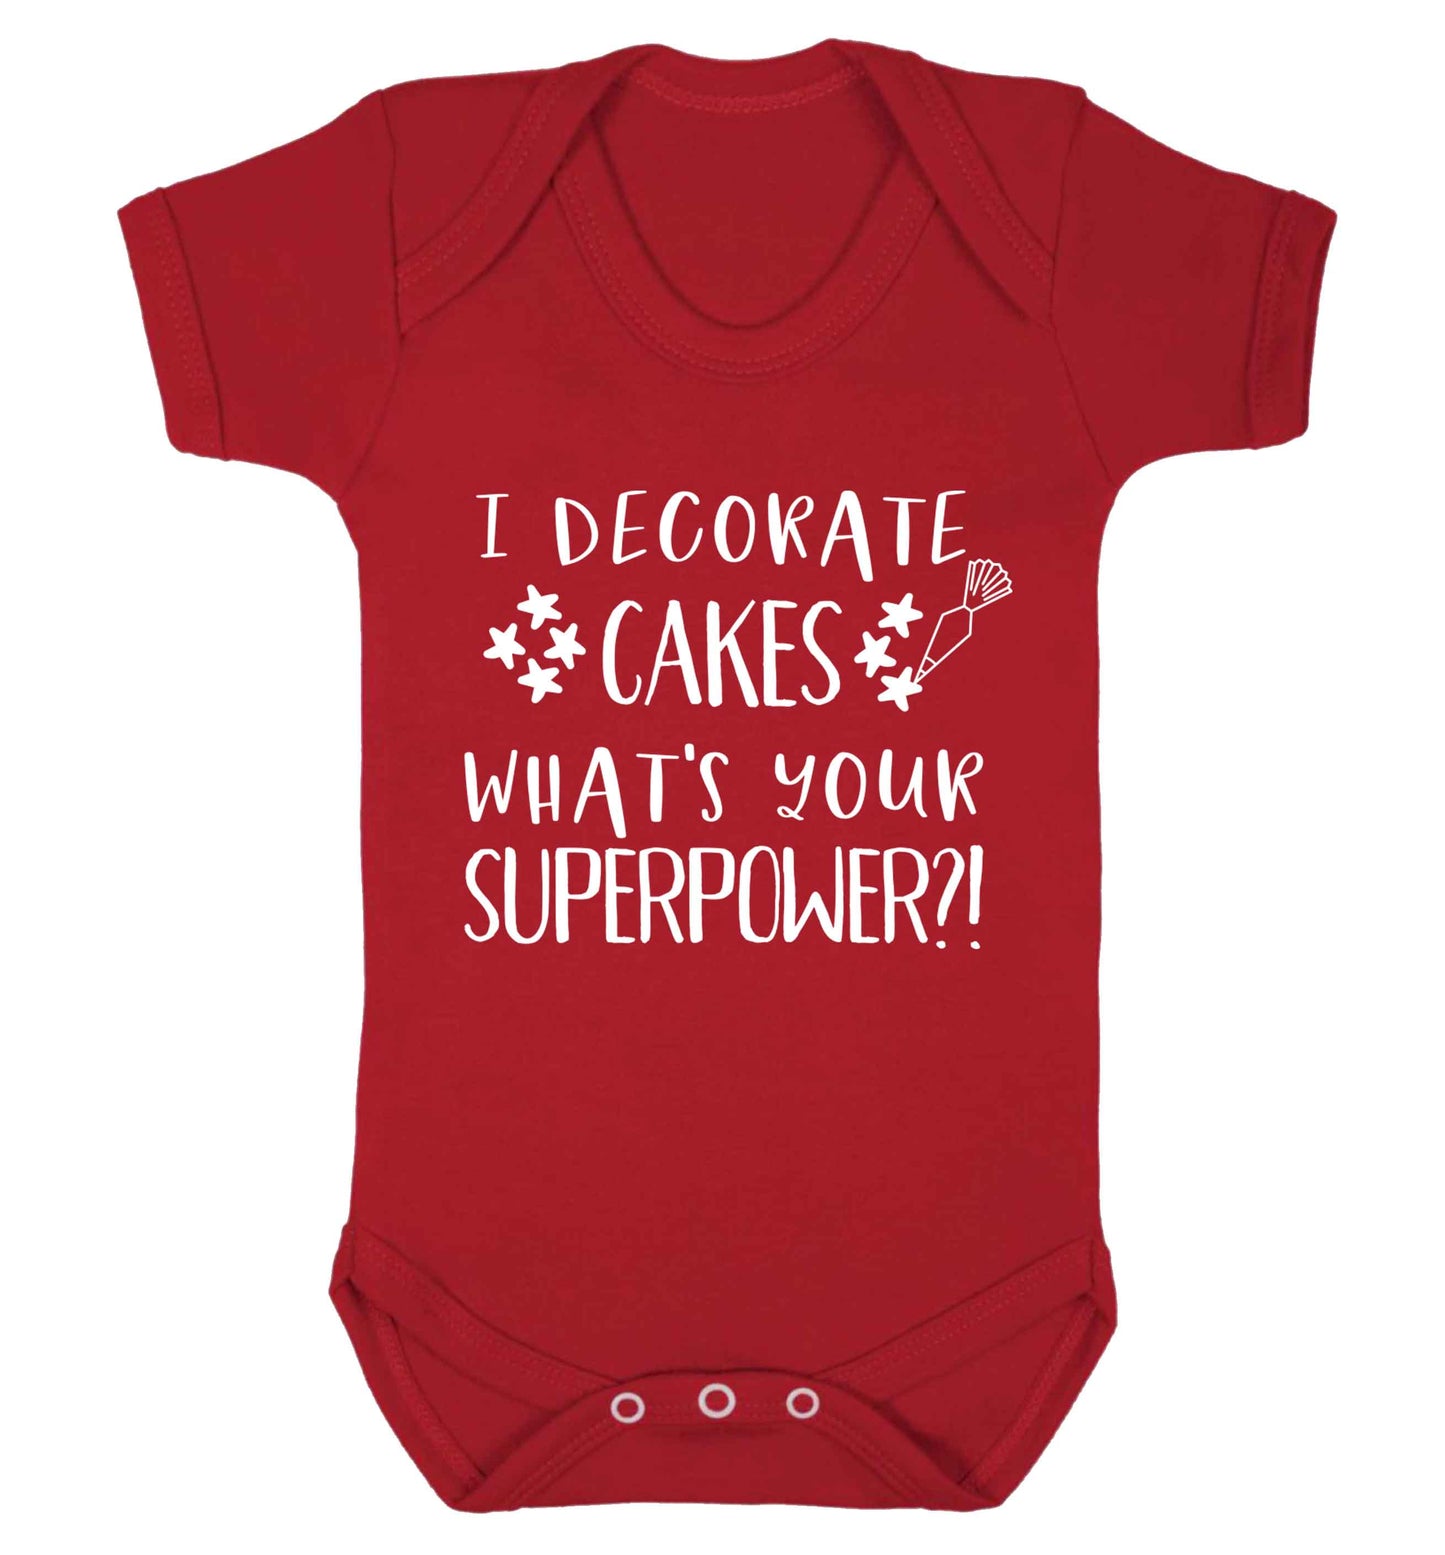 I decorate cakes what's your superpower?! Baby Vest red 18-24 months